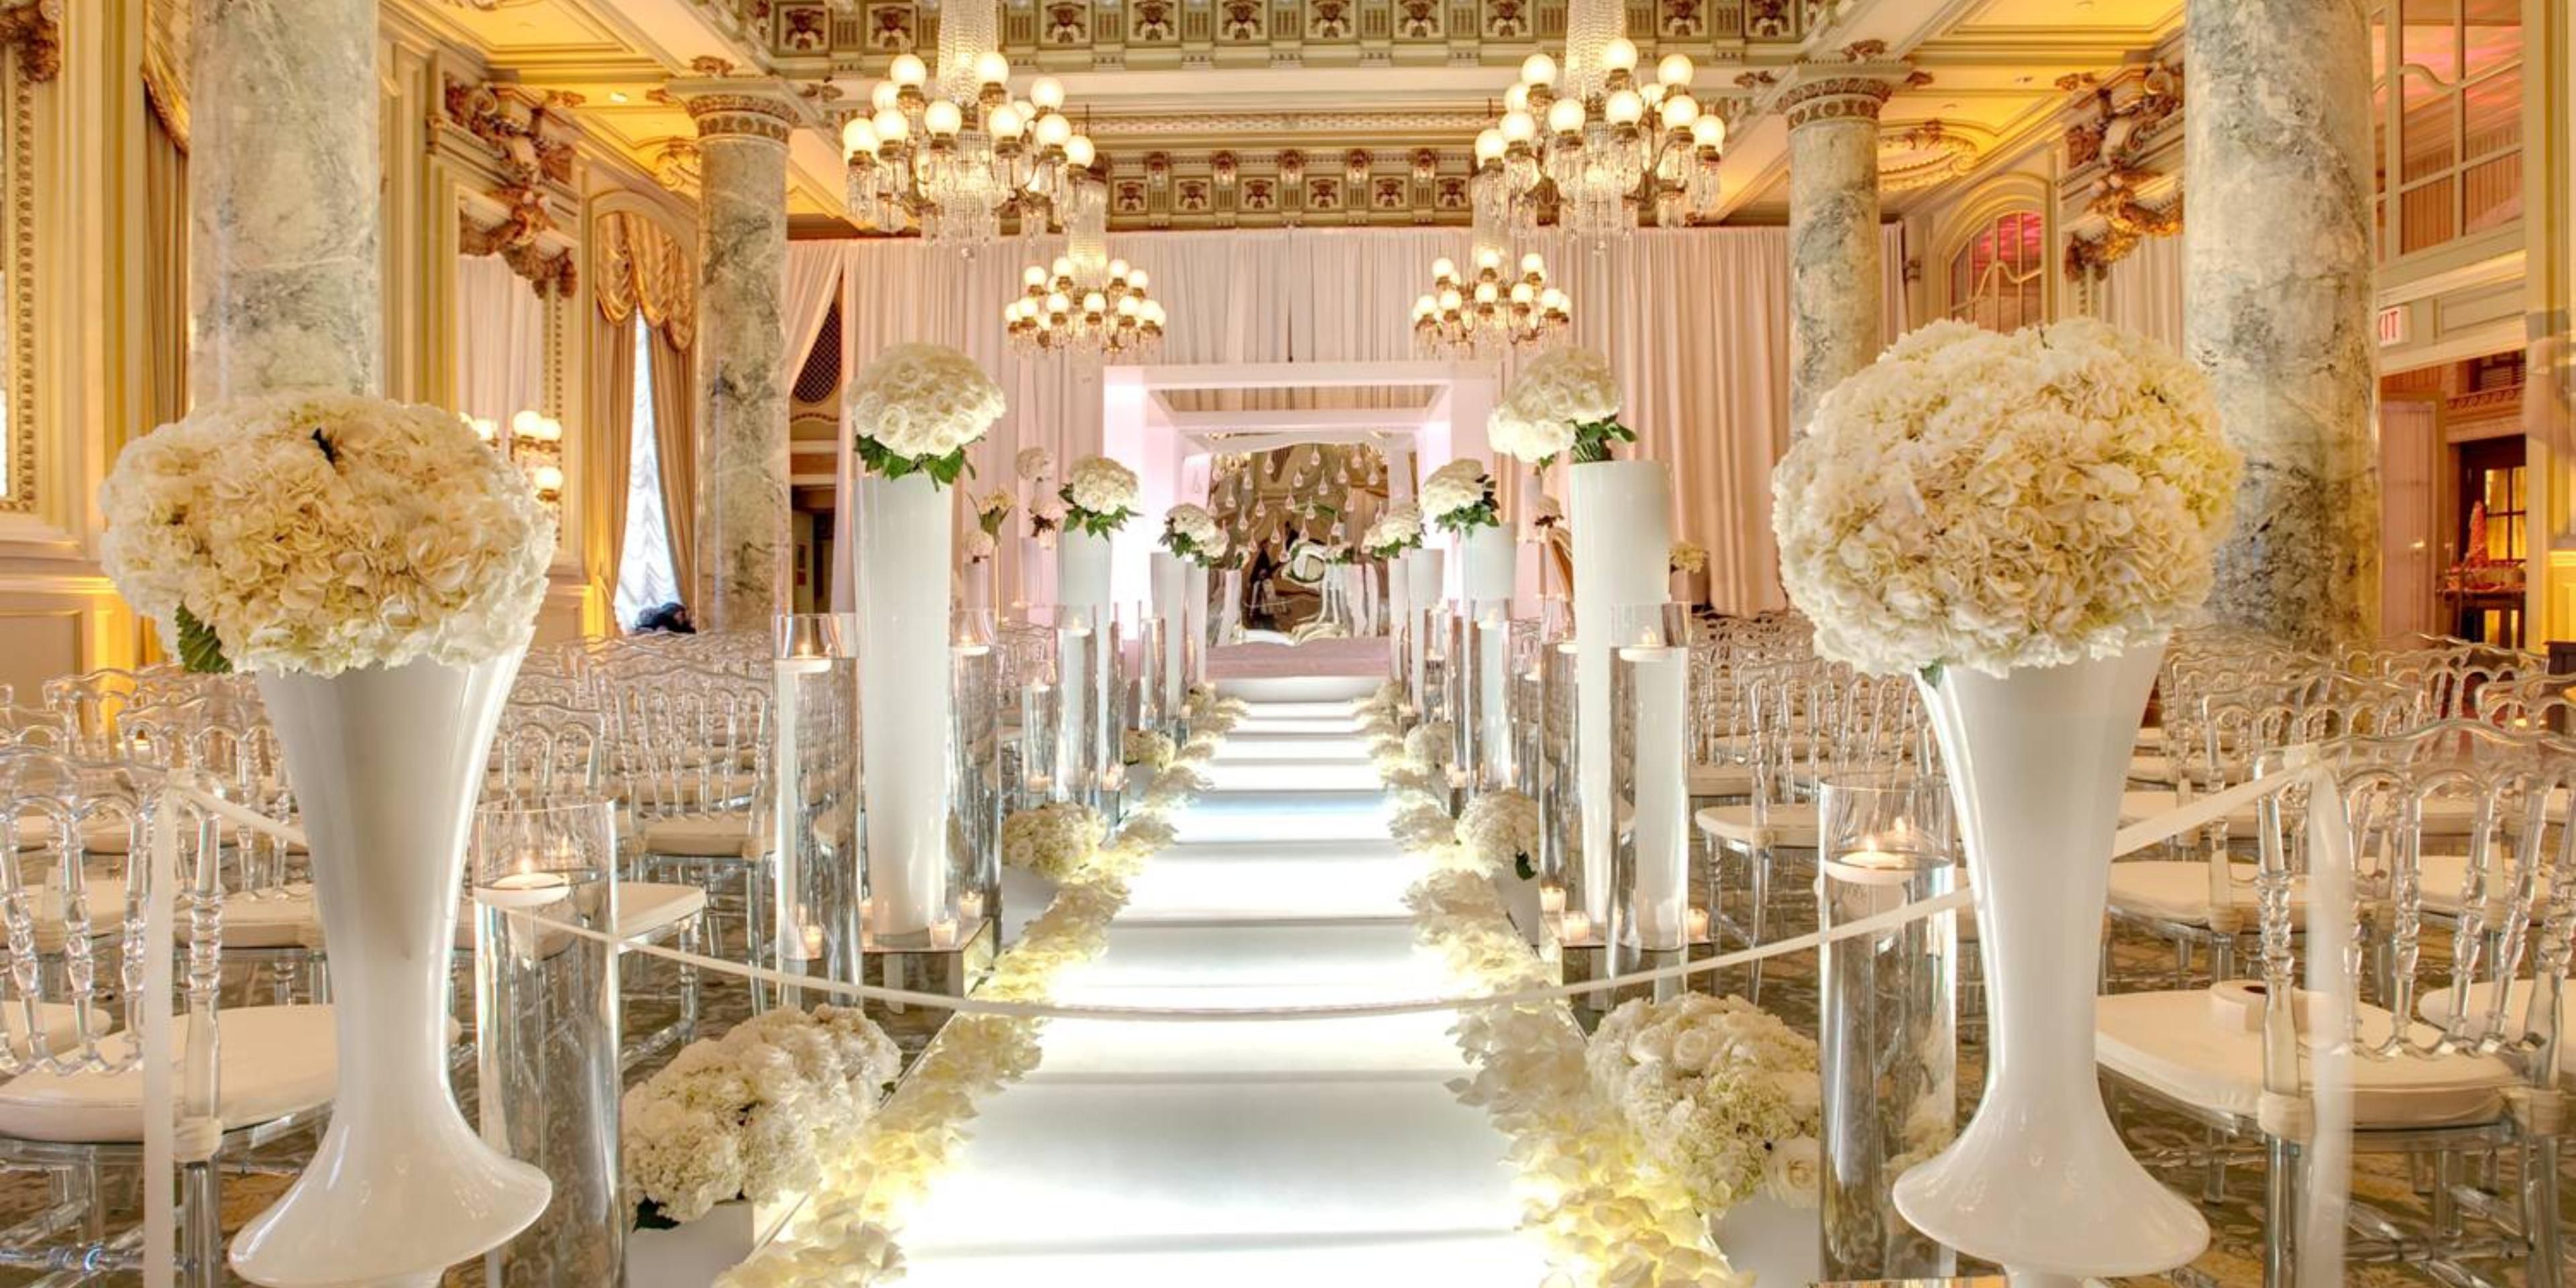 Celebrate love at the sought-after wedding venue, Willard InterContinental. Located in the heart of Washington, D.C., it offers legendary settings, sumptuous cuisine, and impeccable service for intimate ceremonies, ballroom weddings, and receptions. Plan your unforgettable celebration at this luxurious hotel.